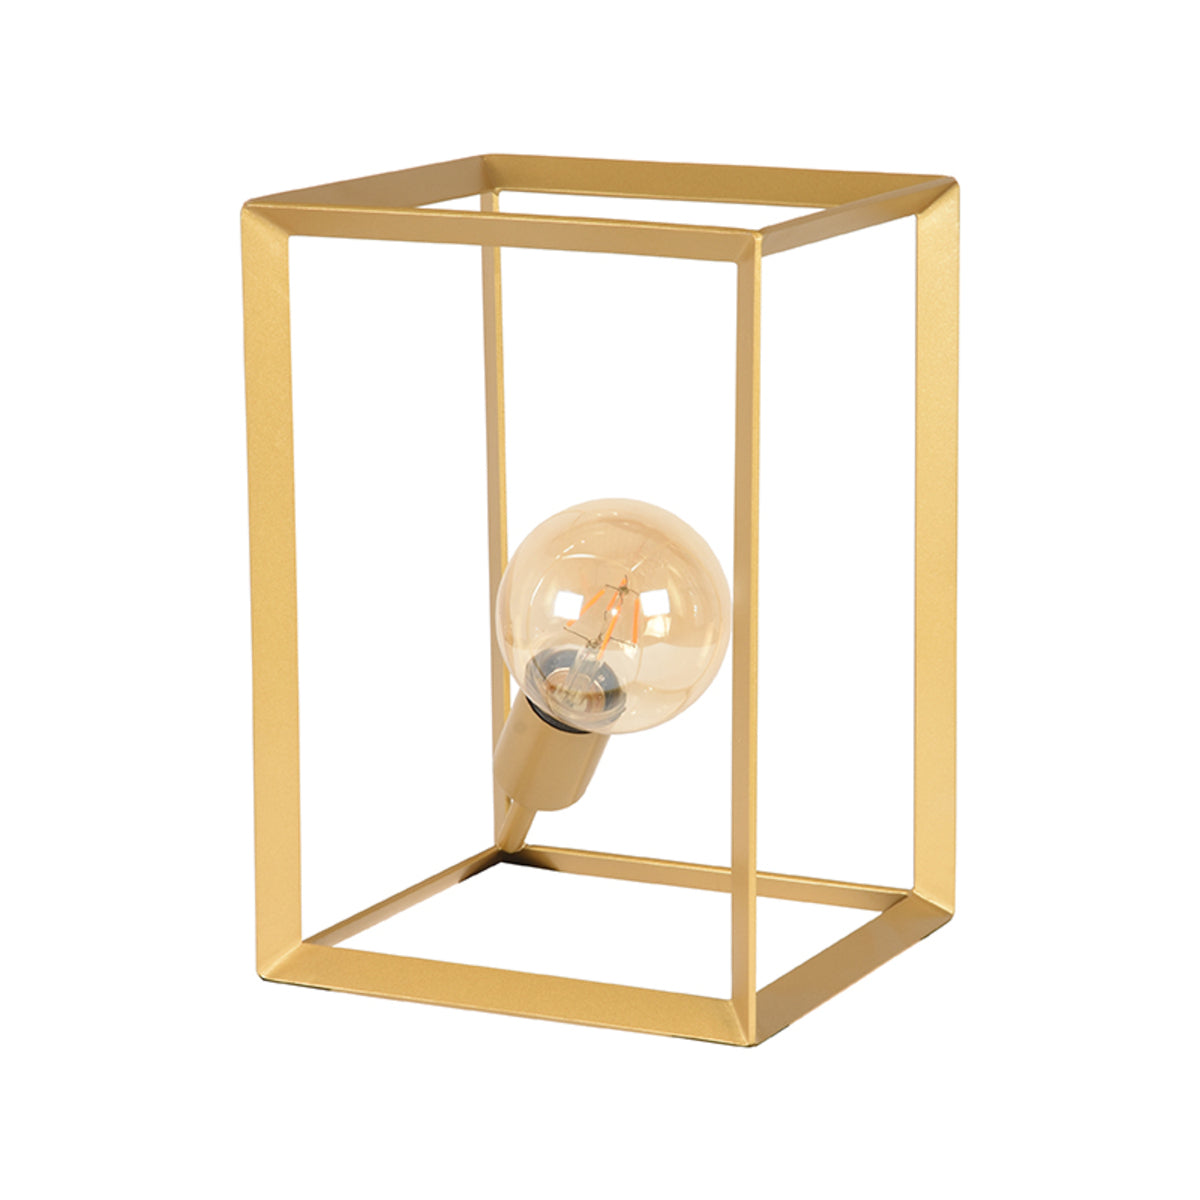 LABEL51 Table lamp Tetto - Antique gold - Metal